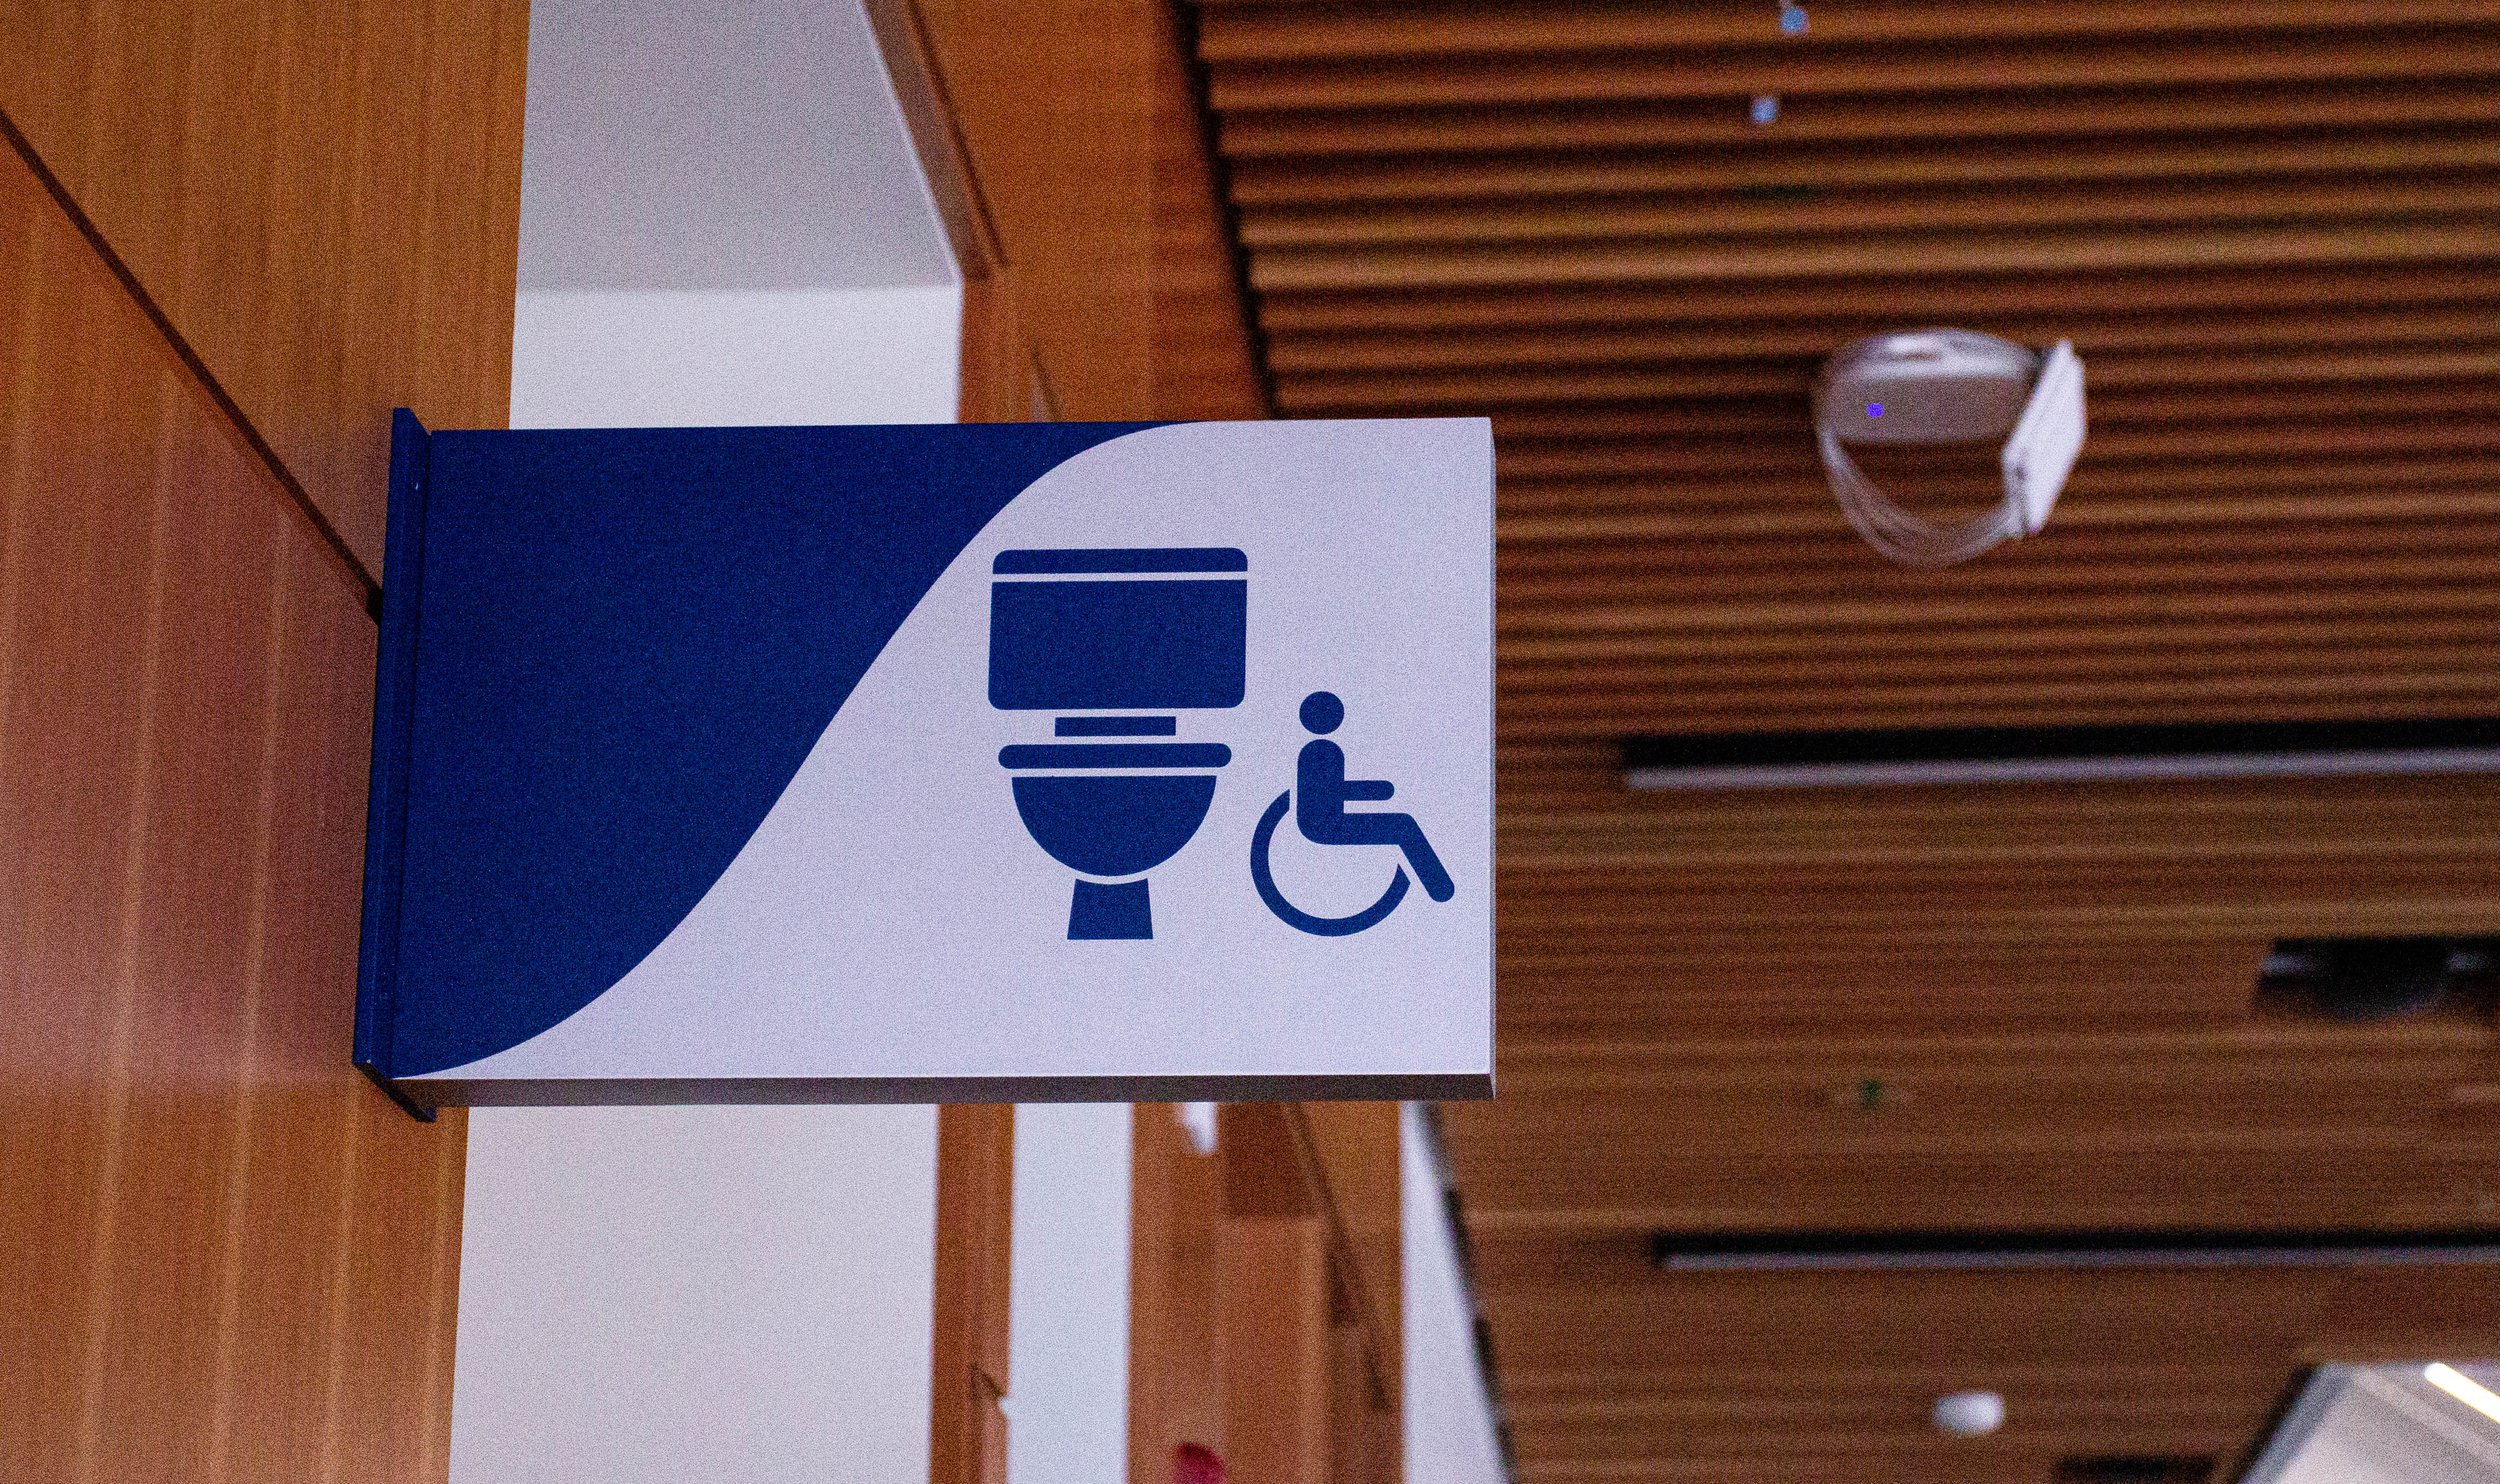  A view of a wooden panelled wall with a two-toned washroom sign: one side is a navy background, on the right a toilet icon next to the accessibility symbol.  